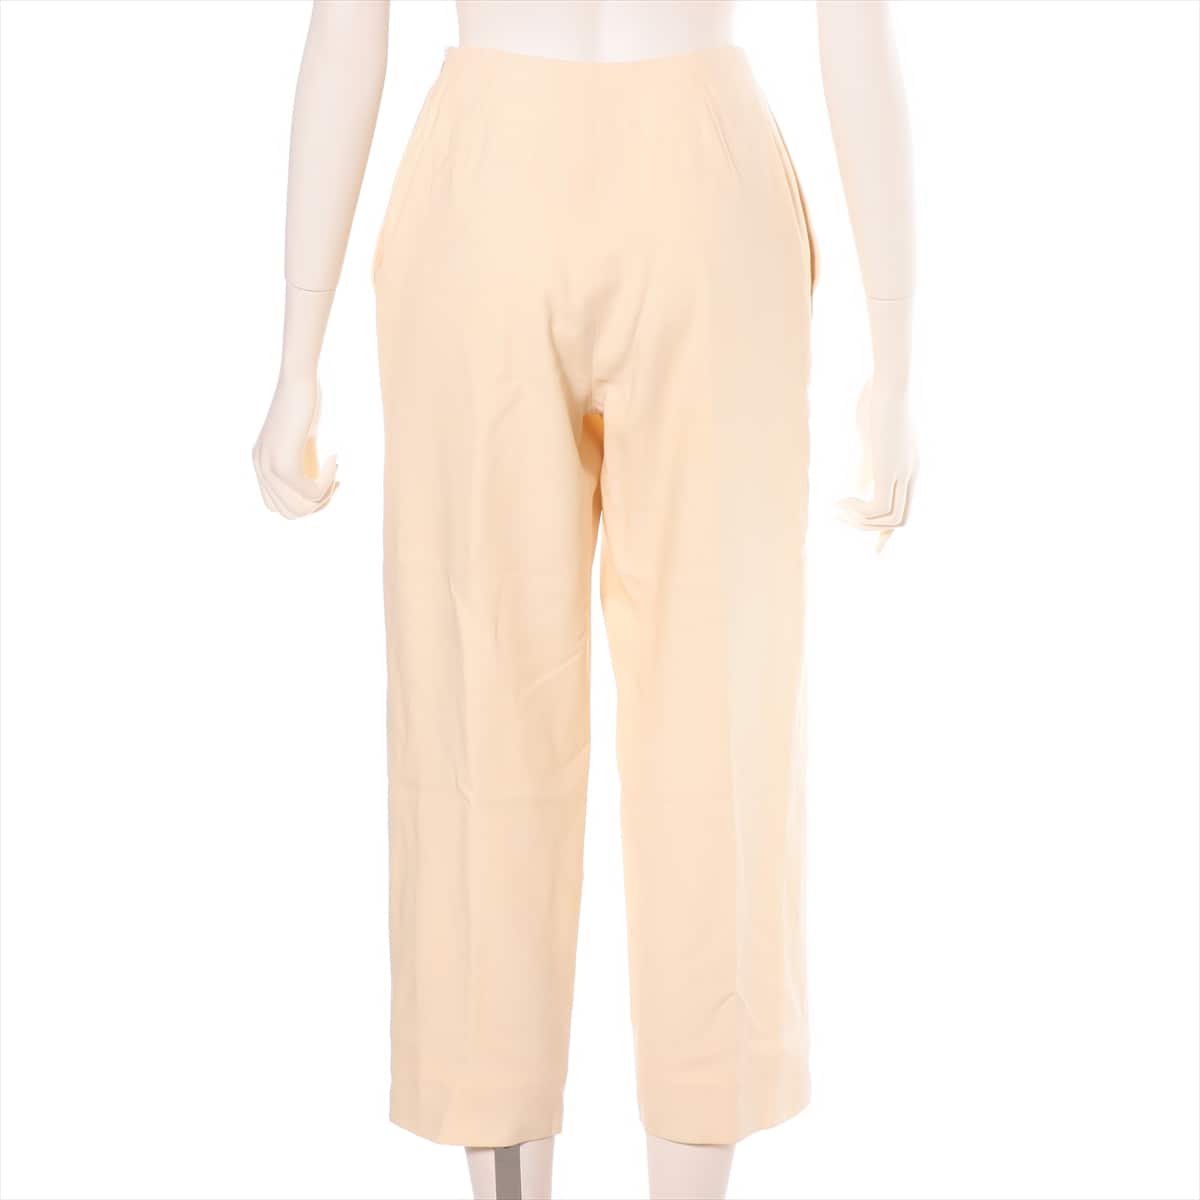 Hermès Margiela Wool Pants 34 Ladies' Ivory  There is a hole under the tag.